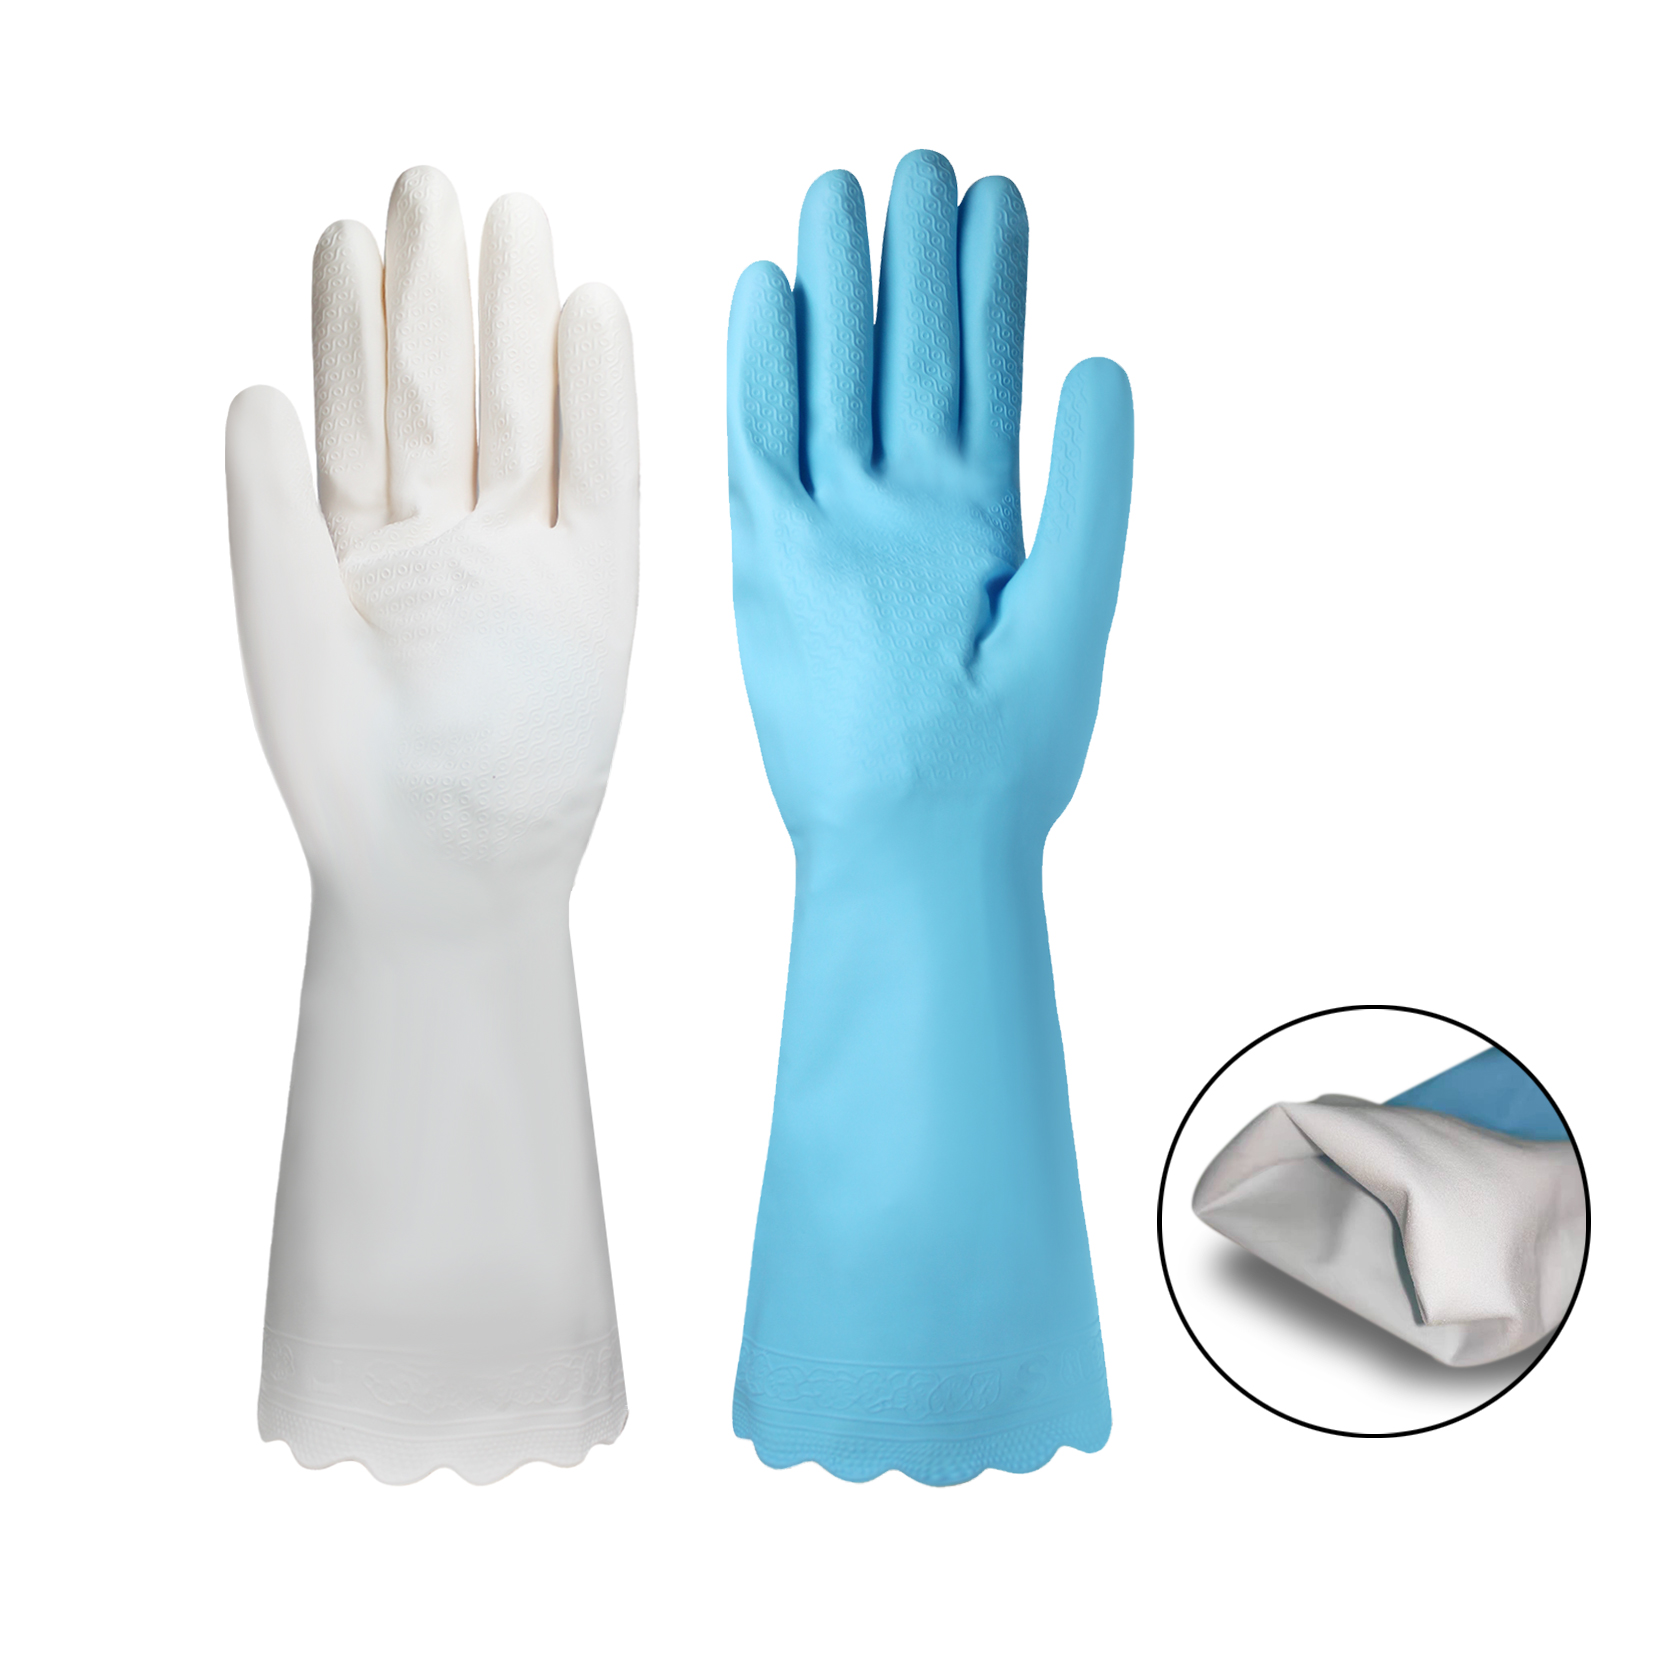 PVC Dishwashing Cleaning Gloves, Skin-Friendly, Reusable Kitchen Gloves with Cotton Flocked Liner, Non-Slip